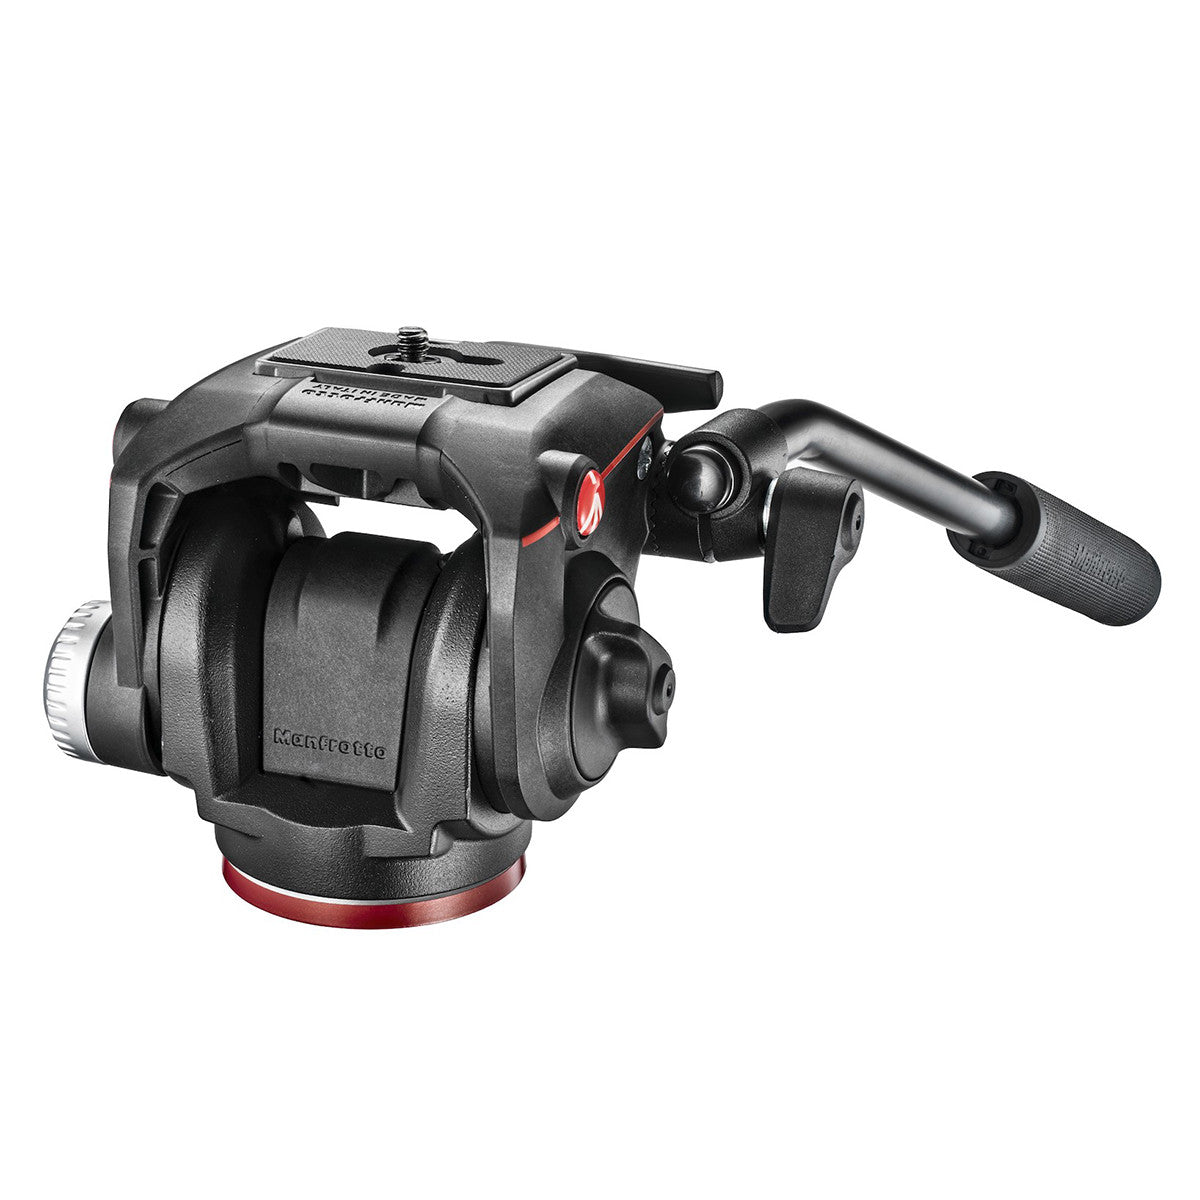 Manfrotto XPRO Fluid Two-Way Head in Manfrotto XPRO Fluid Two-Way Head - goHUNT Shop by GOHUNT | Manfrotto - GOHUNT Shop